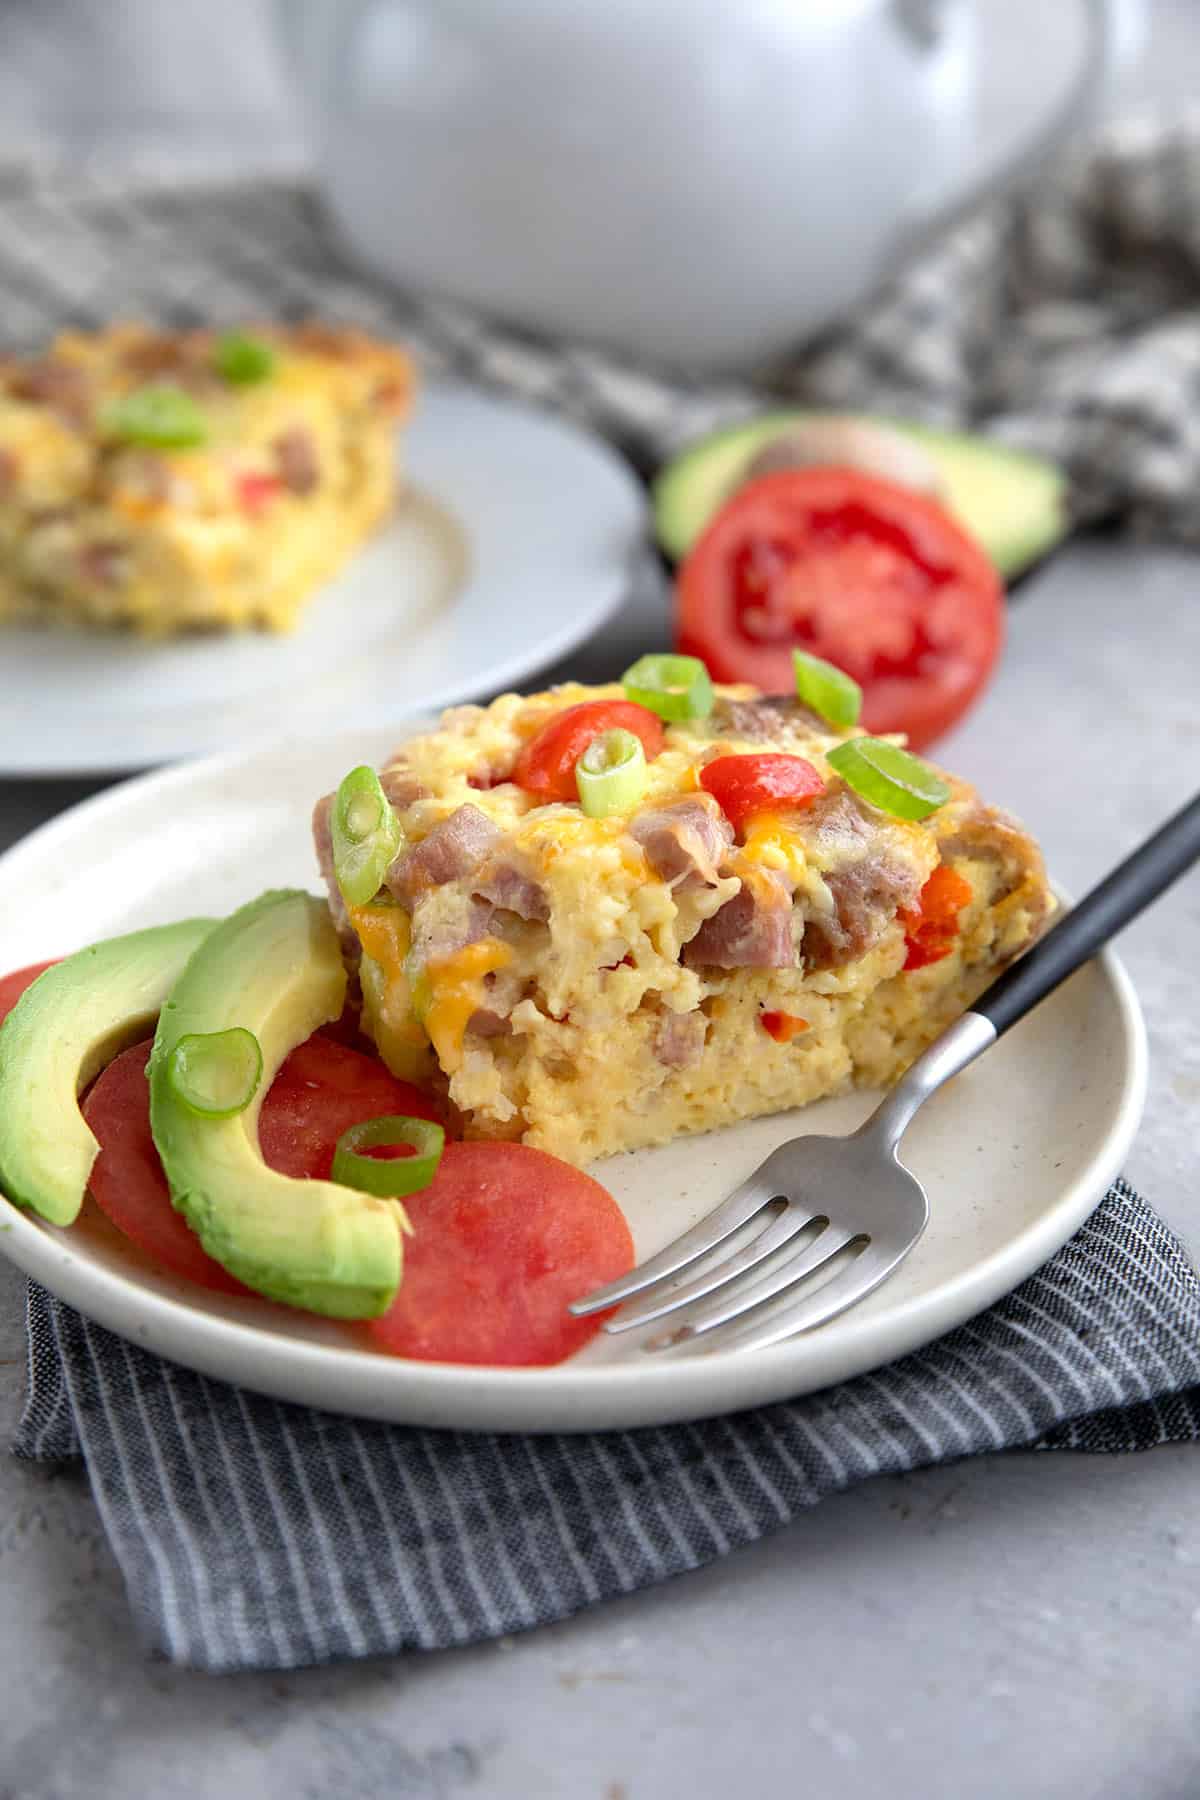 A slice of Slow Cooker Breakfast Casserole on a white plate over a striped grey napkin.